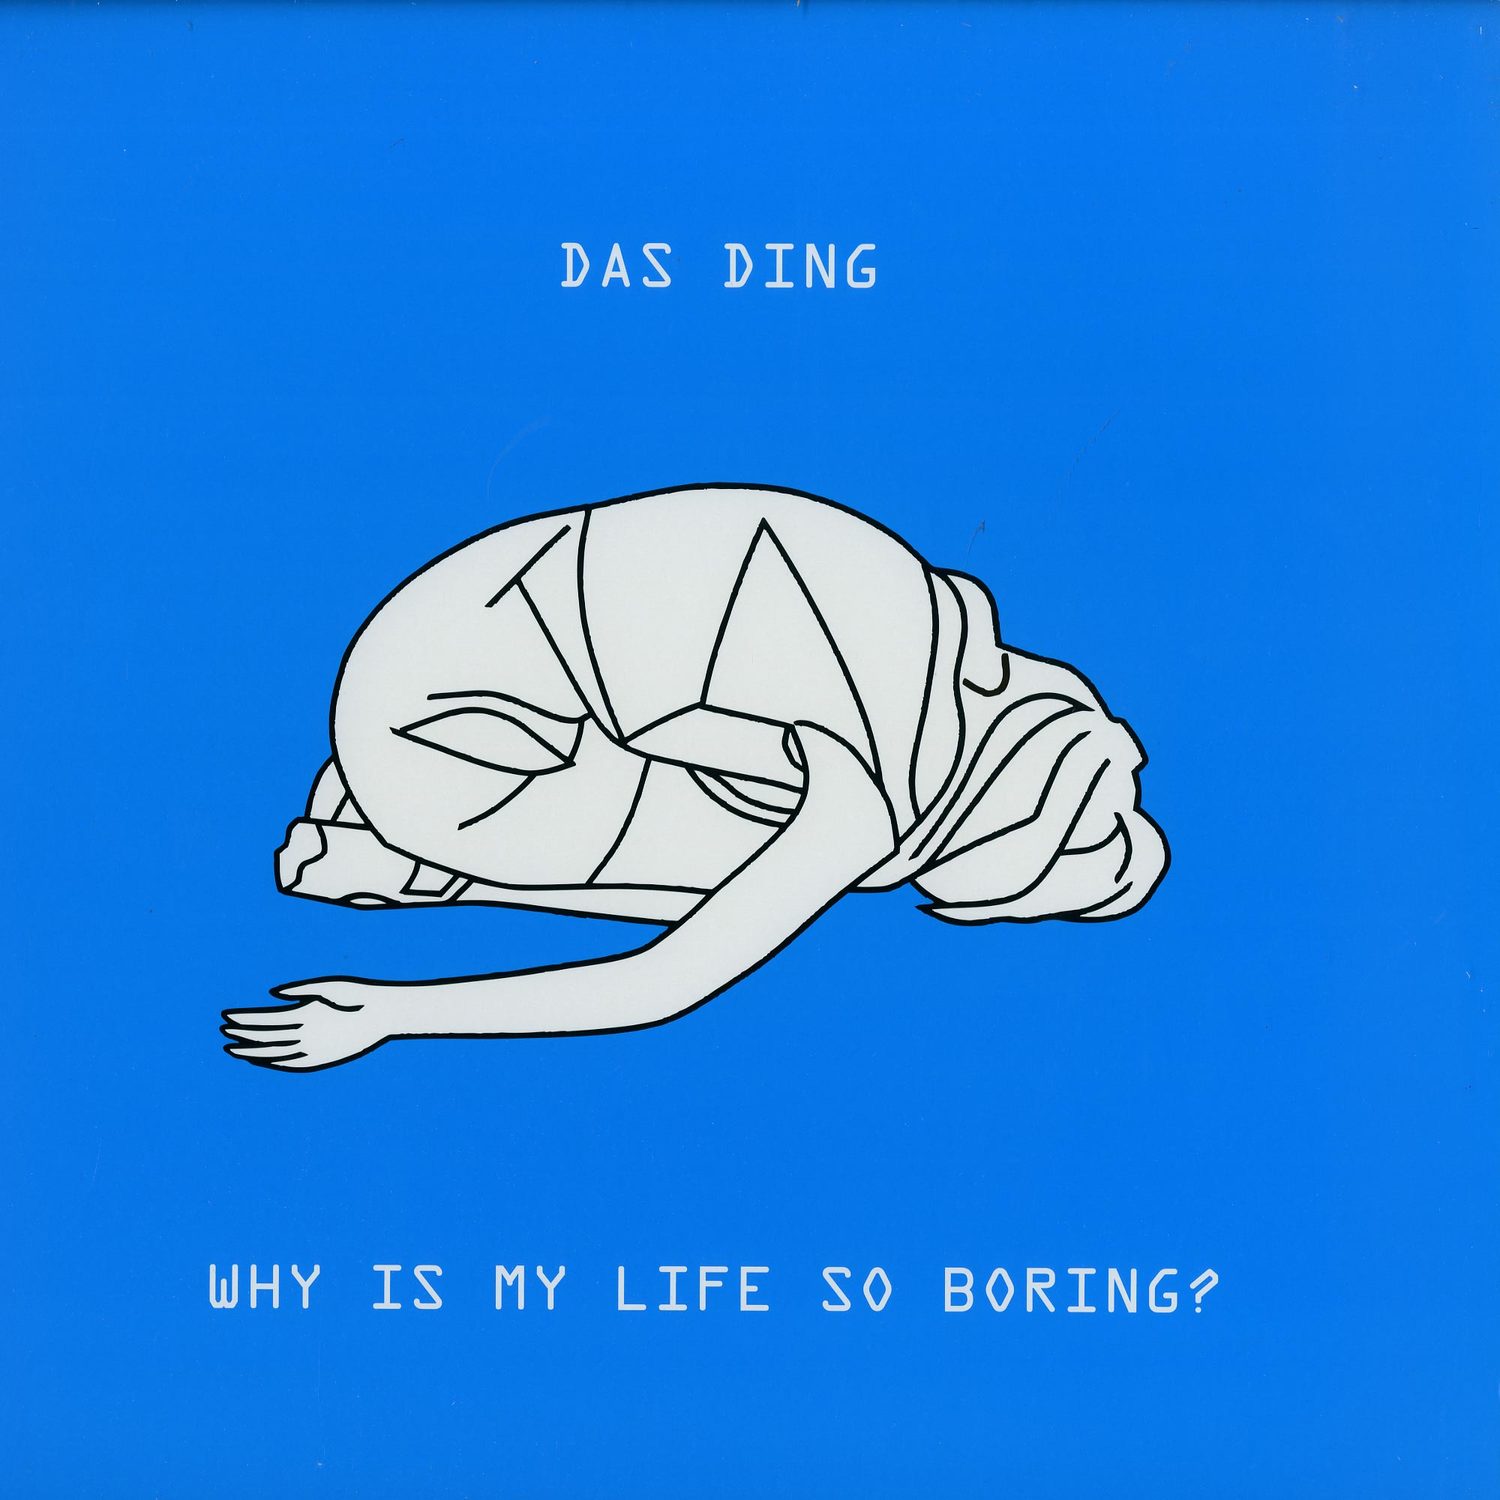 Das Ding - WHY IS MY LIFE SO BORING? 